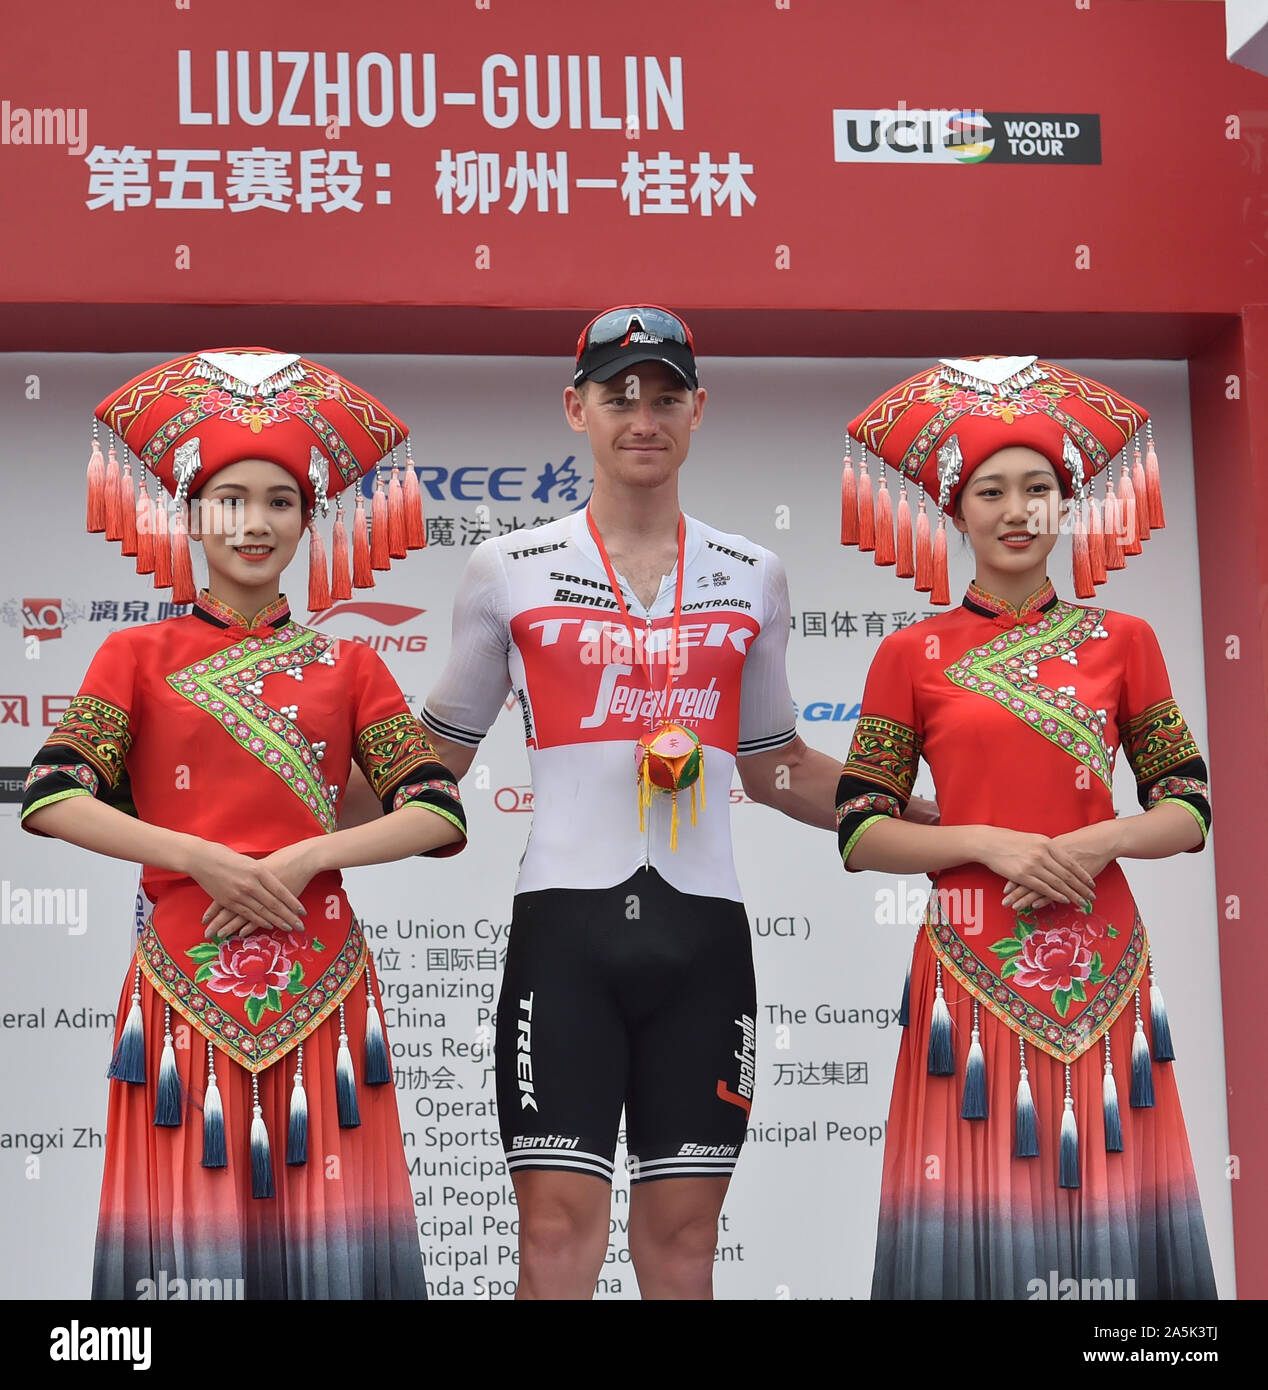 (191021) -- GUILIN, Oct. 21, 2019 (Xinhua) -- Ryan Mullen (C) of Team Trek-Segafredo poses for photograph during the awarding ceremony after the stage 5 at the 2019 UCI World Tour/Tour of Guangxi in Guilin, south China's Guangxi Zhuang Autonomous Region, Oct. 21, 2019. (Xinhua/Lei Jiaxing) Stock Photo